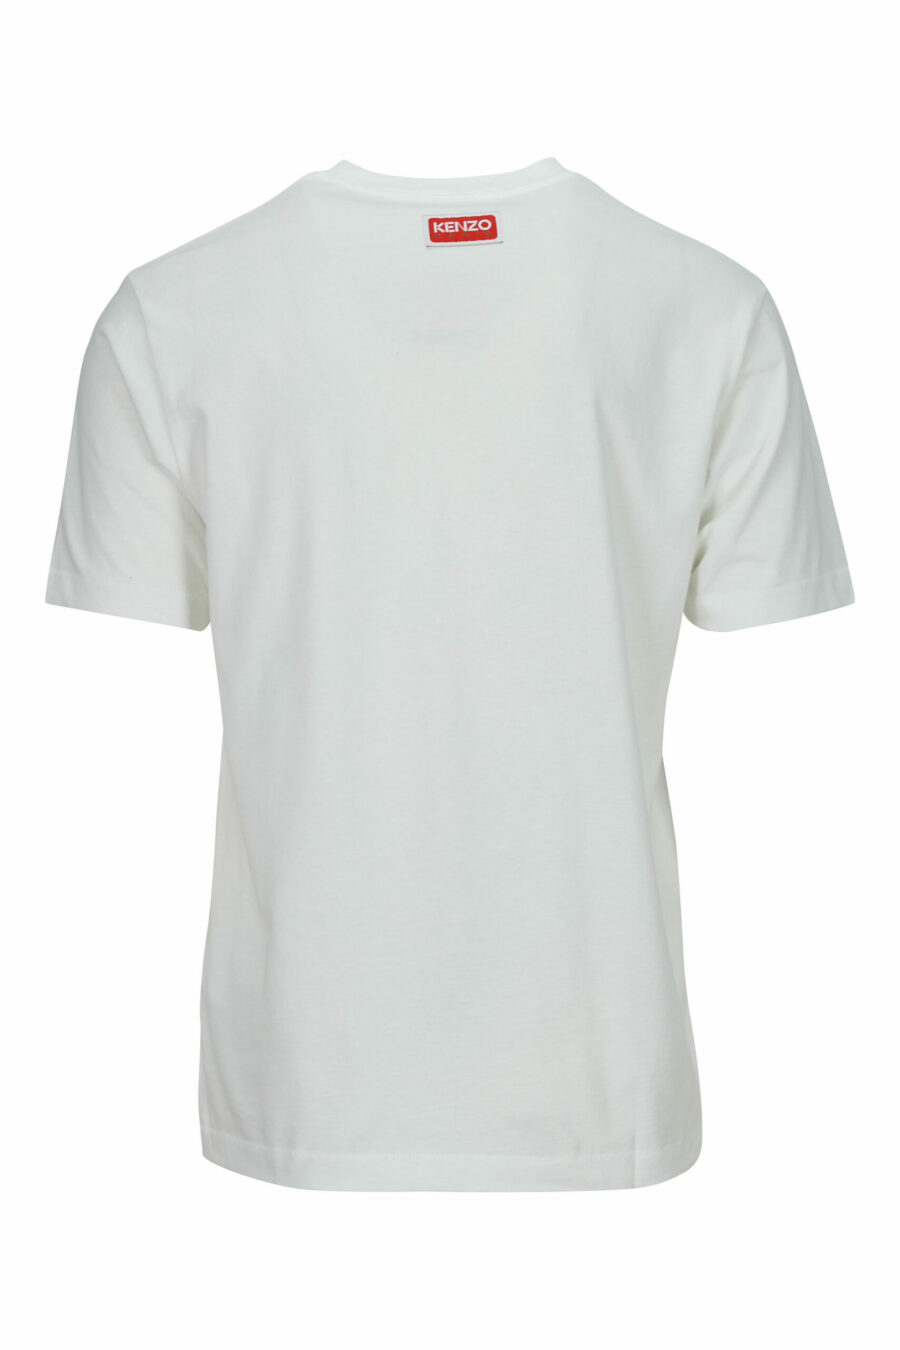 Oversize white t-shirt with small tiger embossed logo - 3612230571716 1 scaled